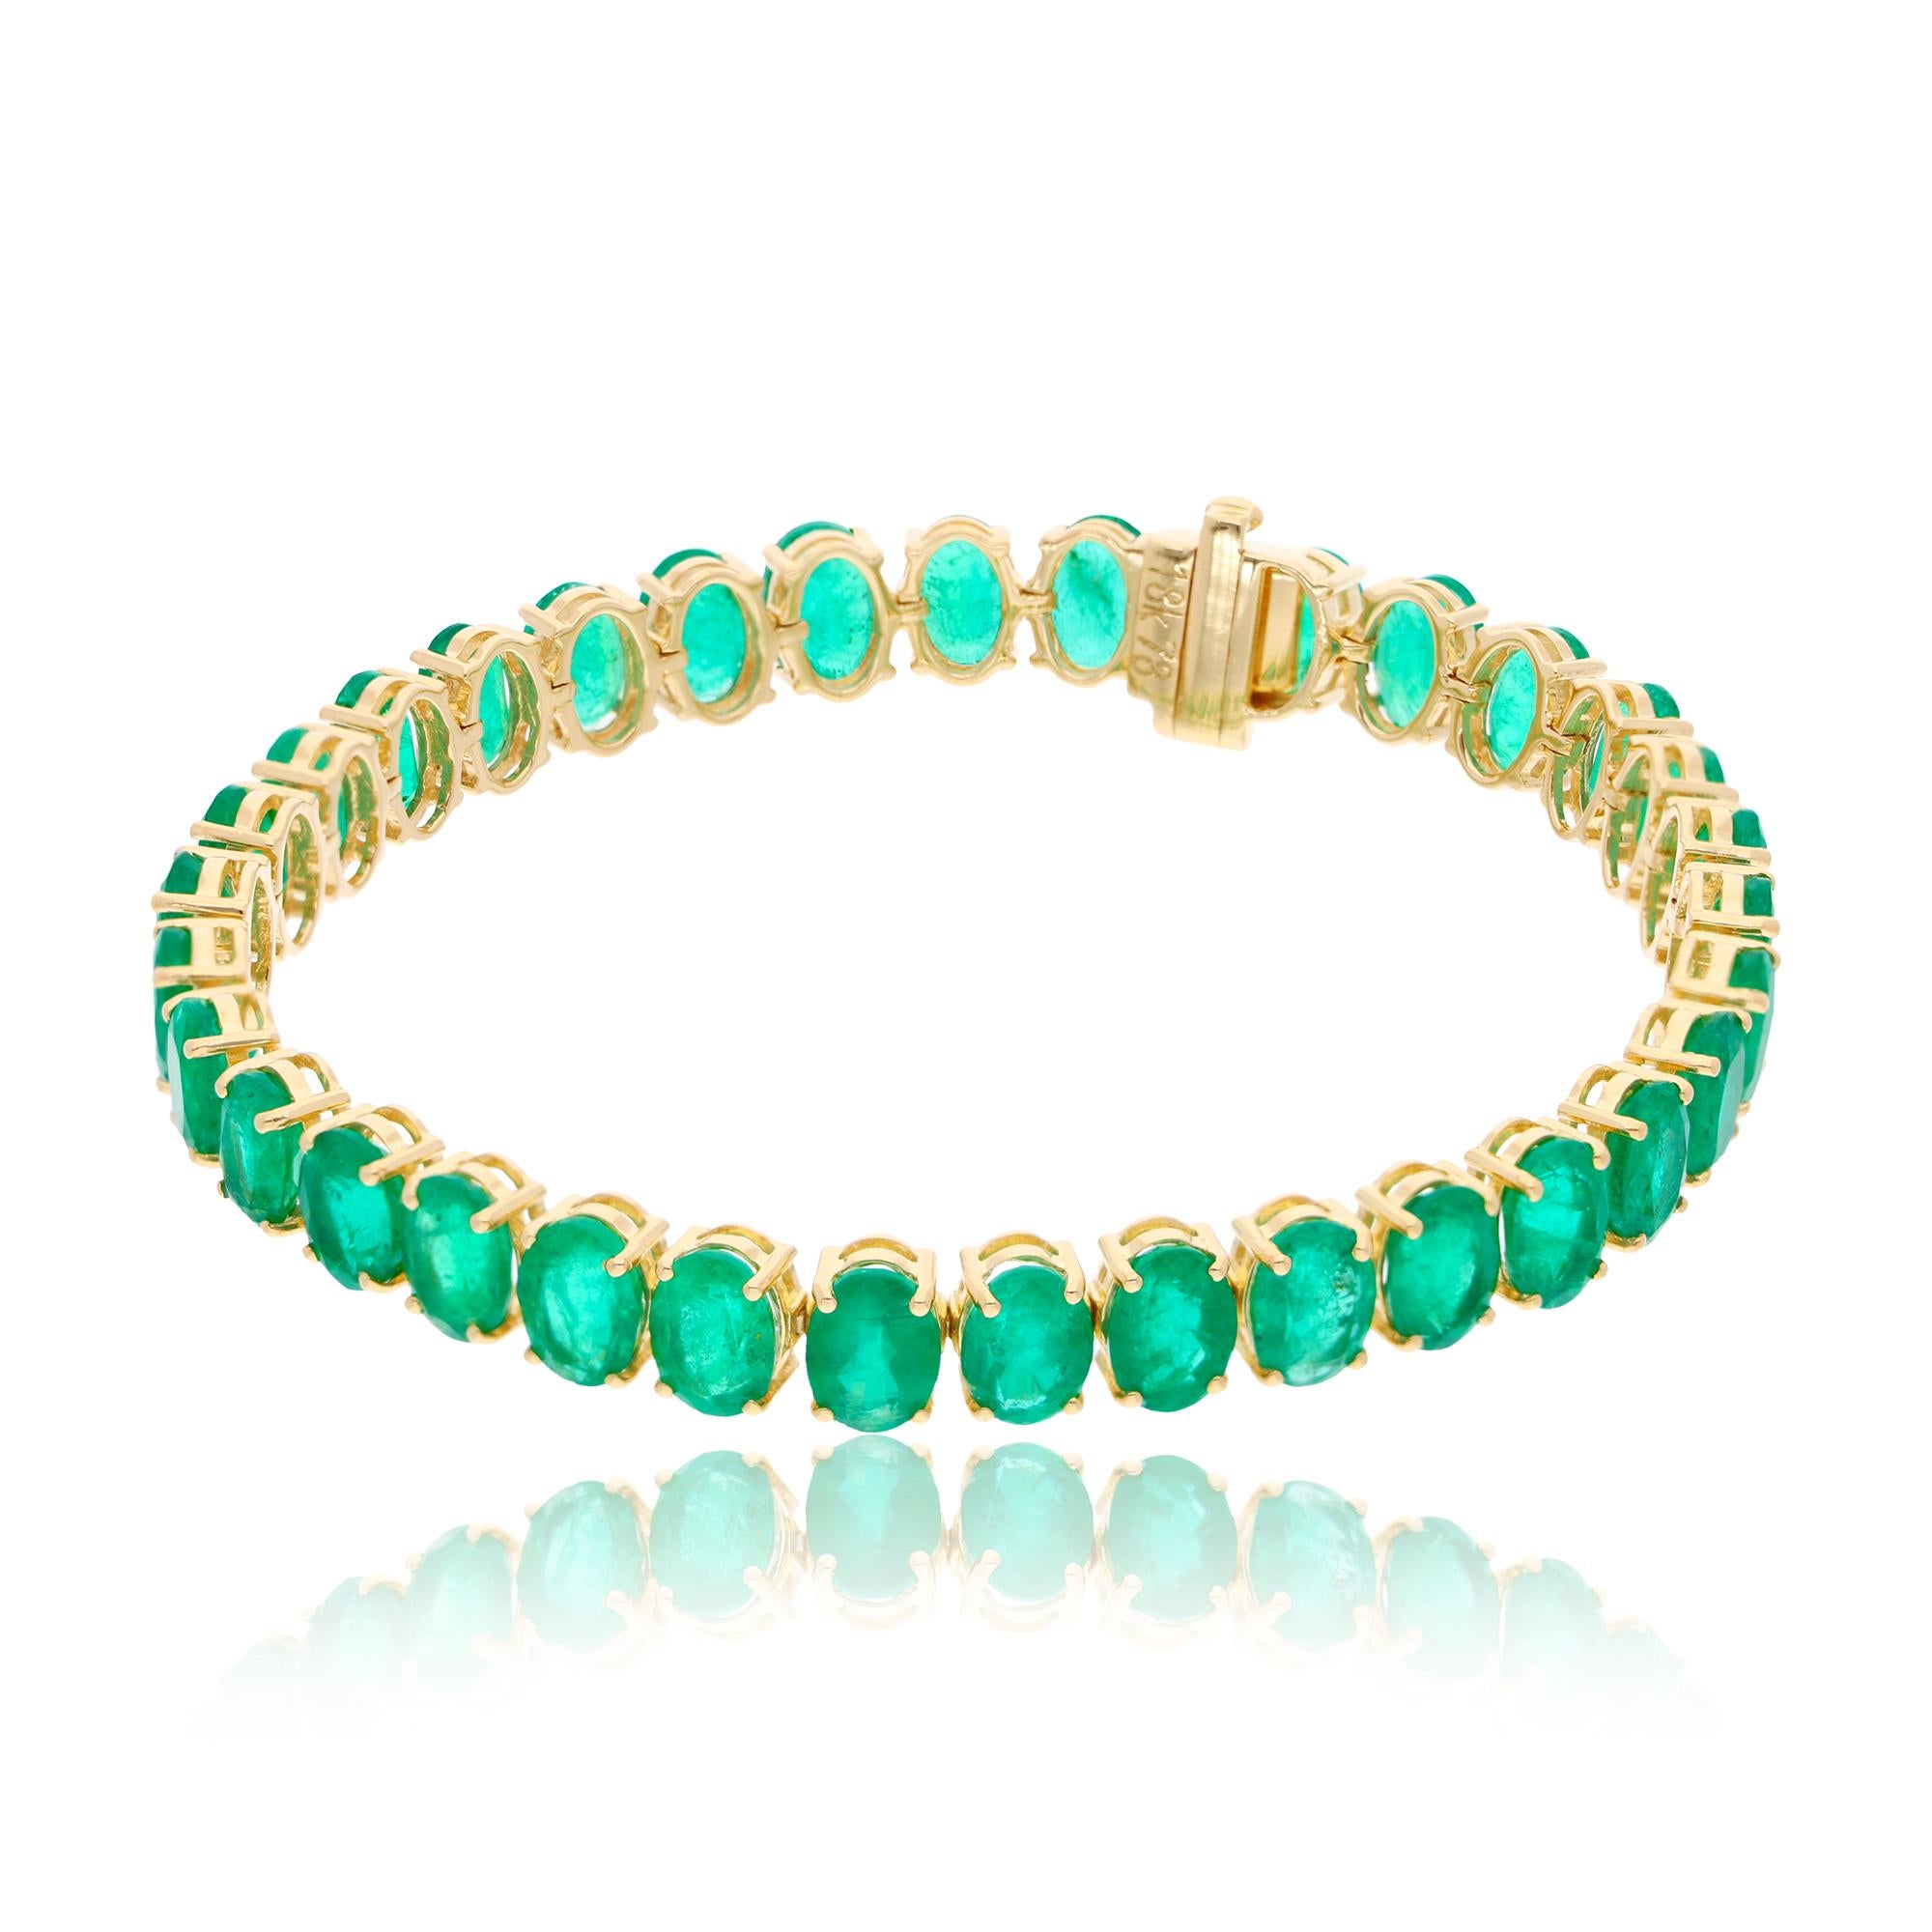 Item Code :- SEBR-42215
Gross Wt. :- 18.72 gm
18k Yellow Gold Wt. :- 13.67 gm
Emerald Wt. :- 25.24 Ct. 
Bracelet Size :- 7 Inches Long
✦ Sizing
.....................
We can adjust most items to fit your sizing preferences. Most items can be made to